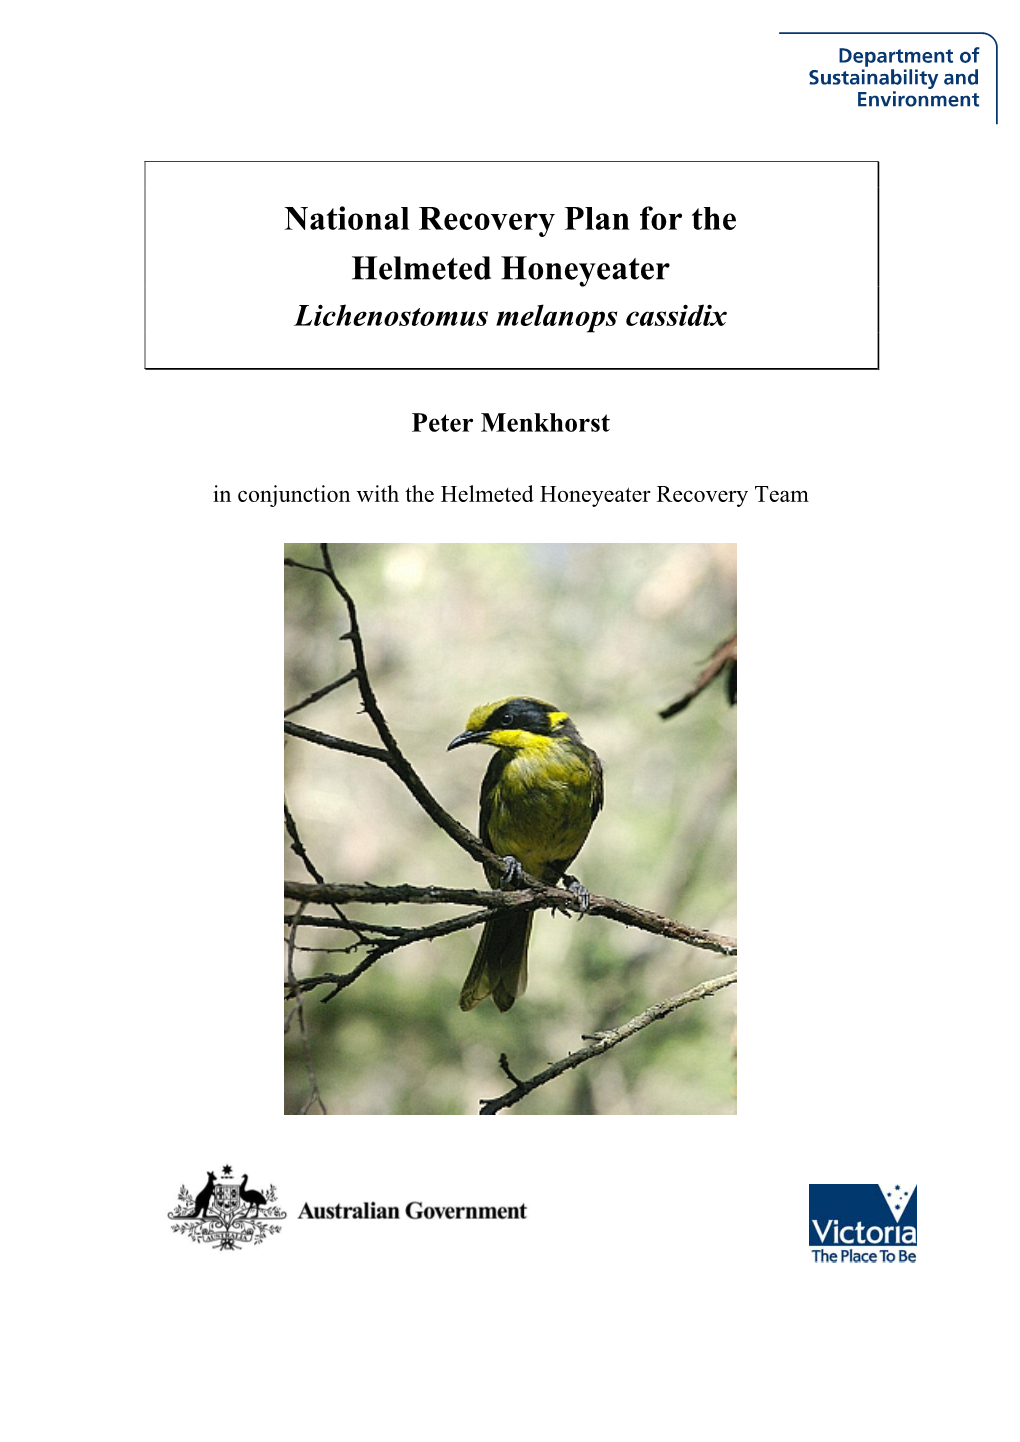 National Recovery Plan for Helmeted Honeyeater (Lichenostomus